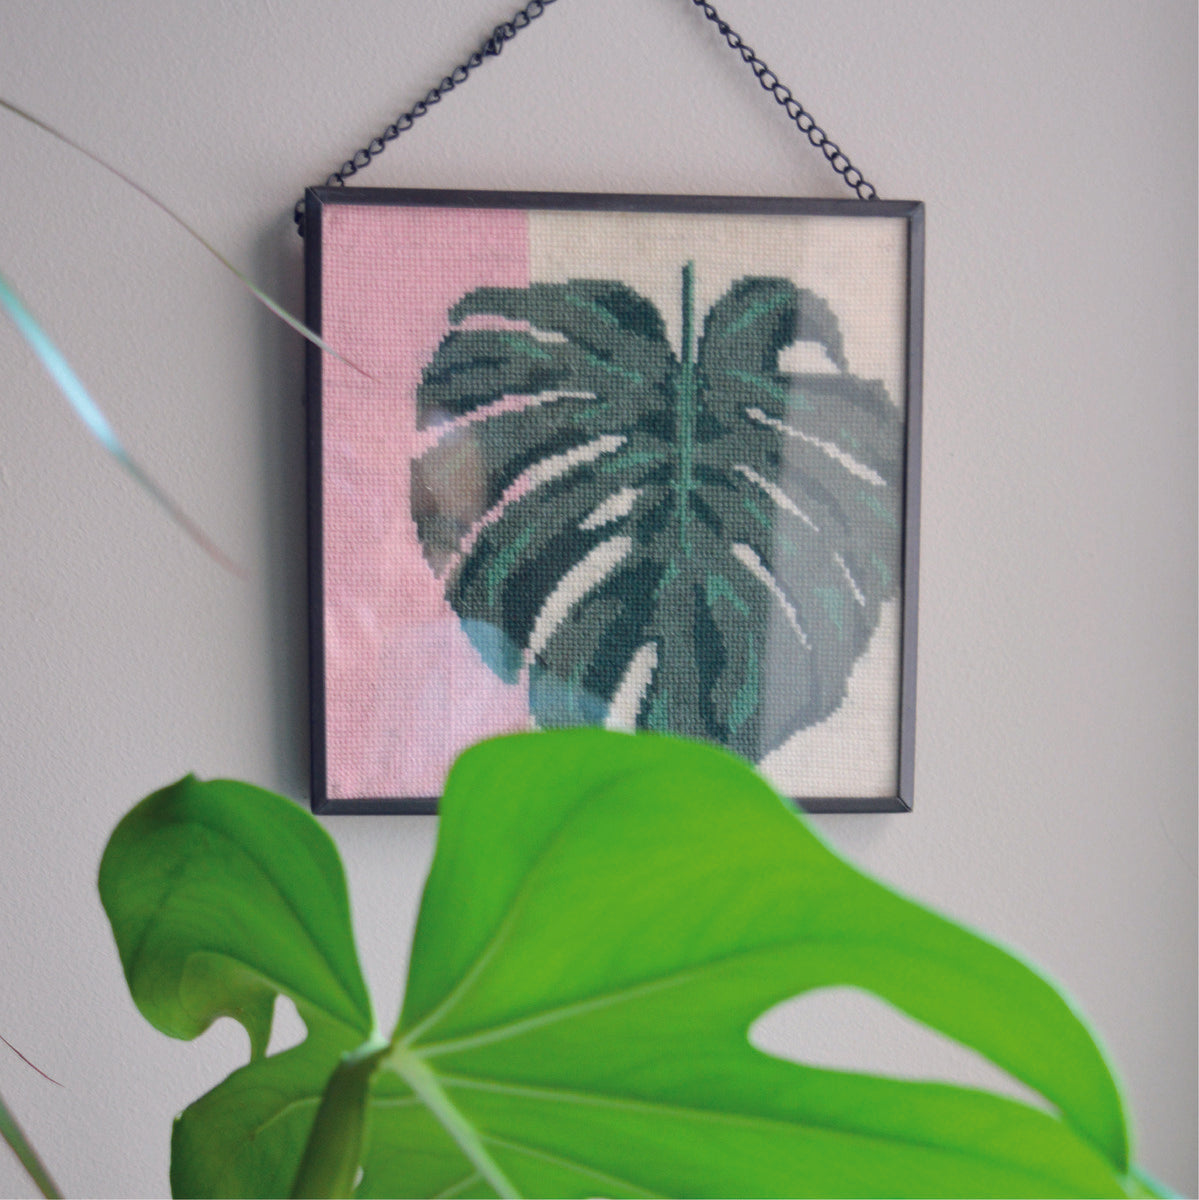 The modern monstera leaf tapestry kit  made into a striking picture once finished and framed.